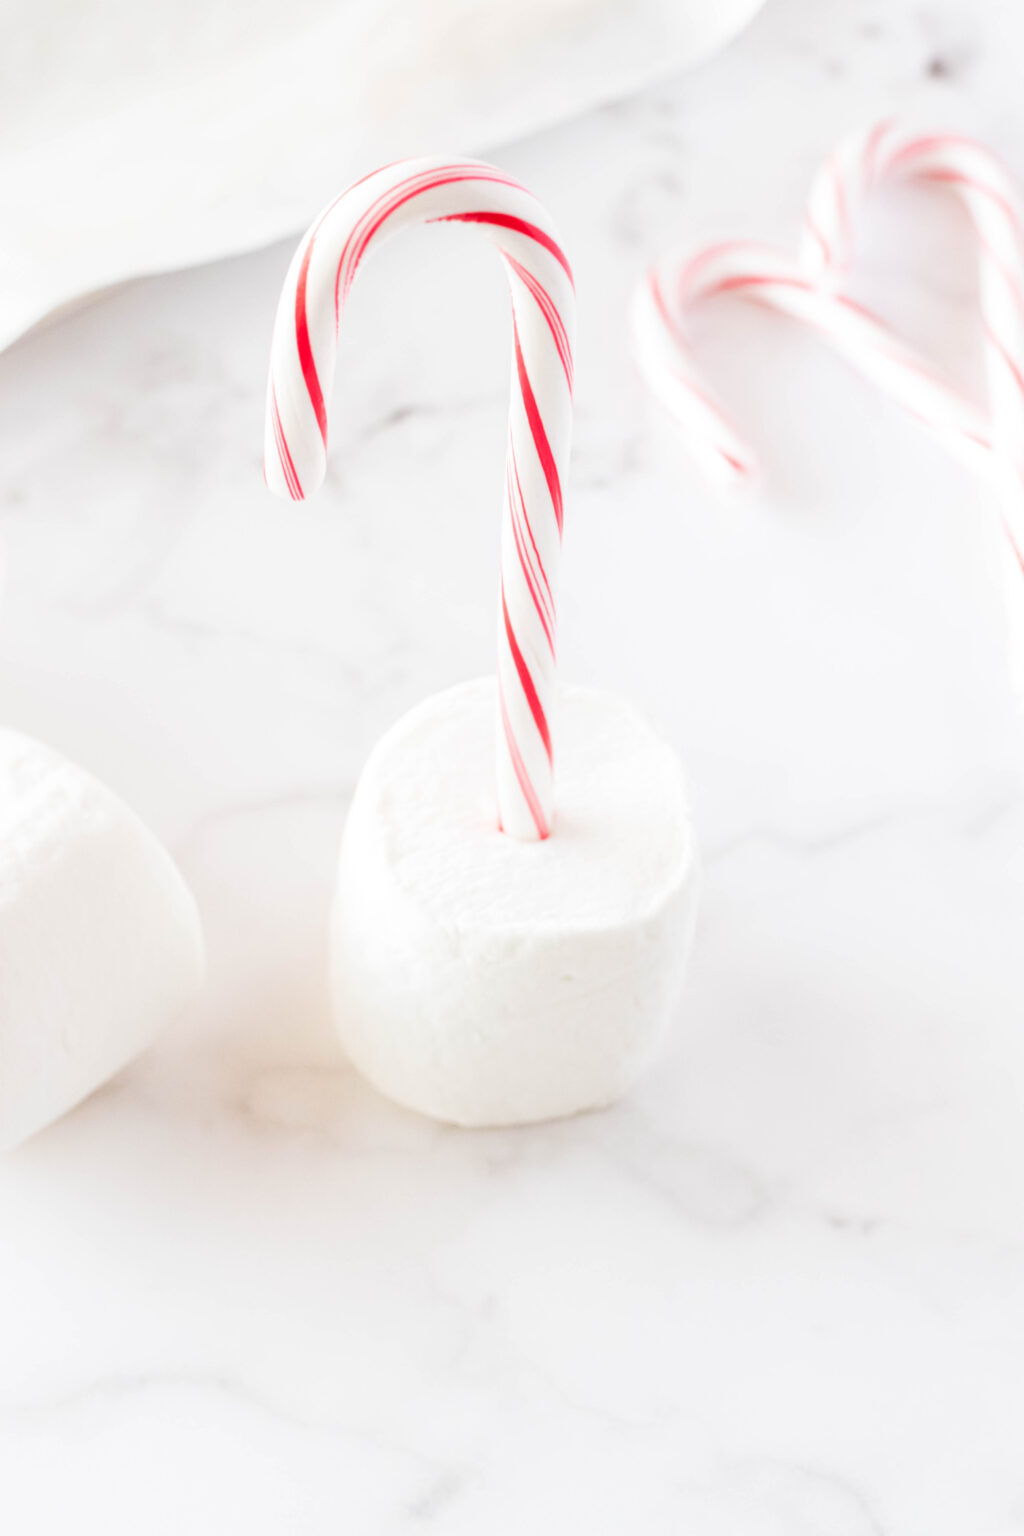 candy cane in a marshmallow